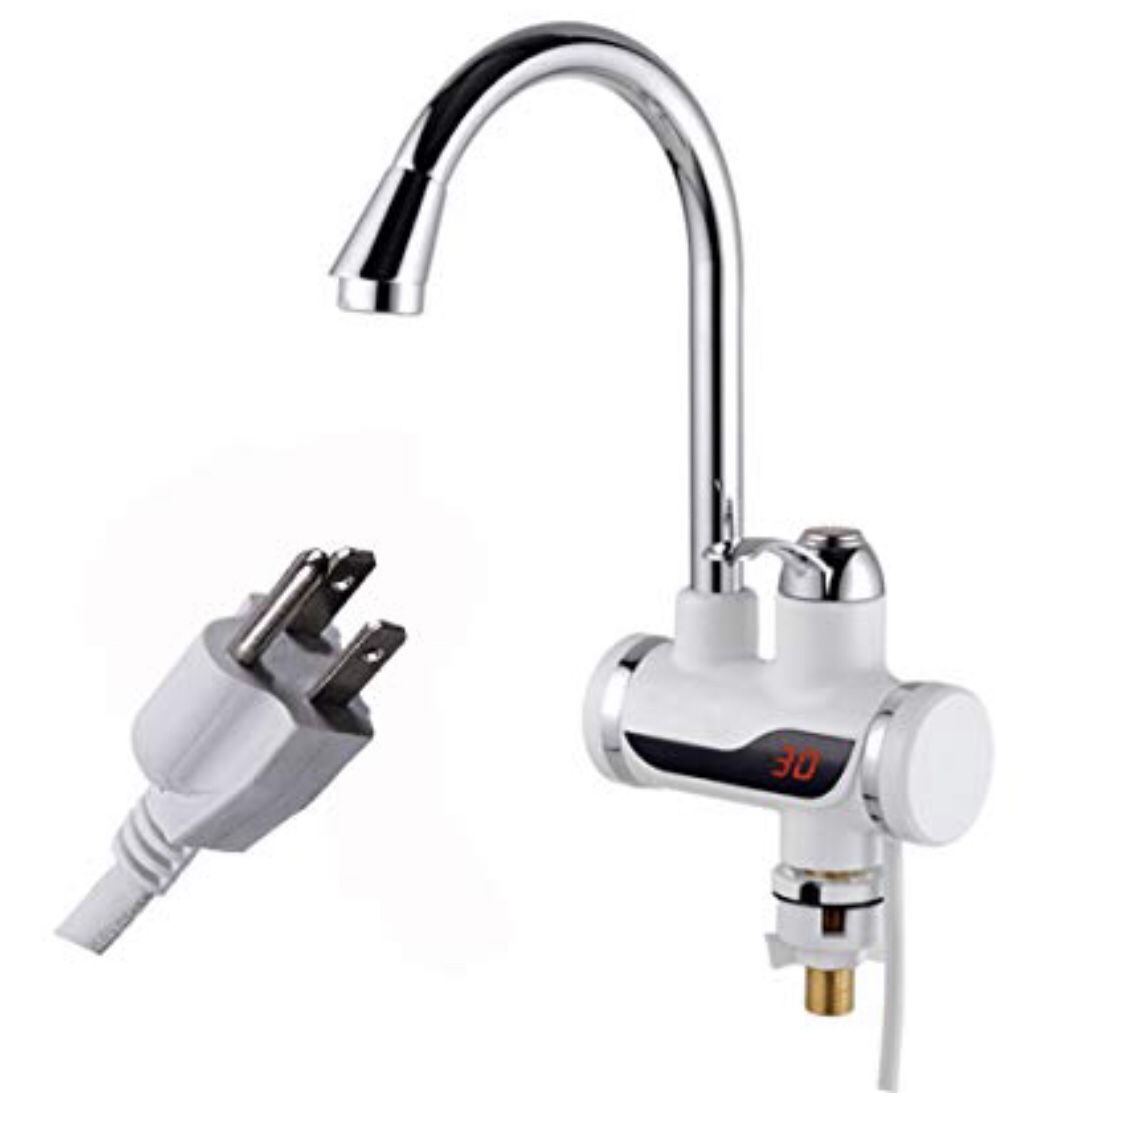 Electric INSTANT hot water faucet!